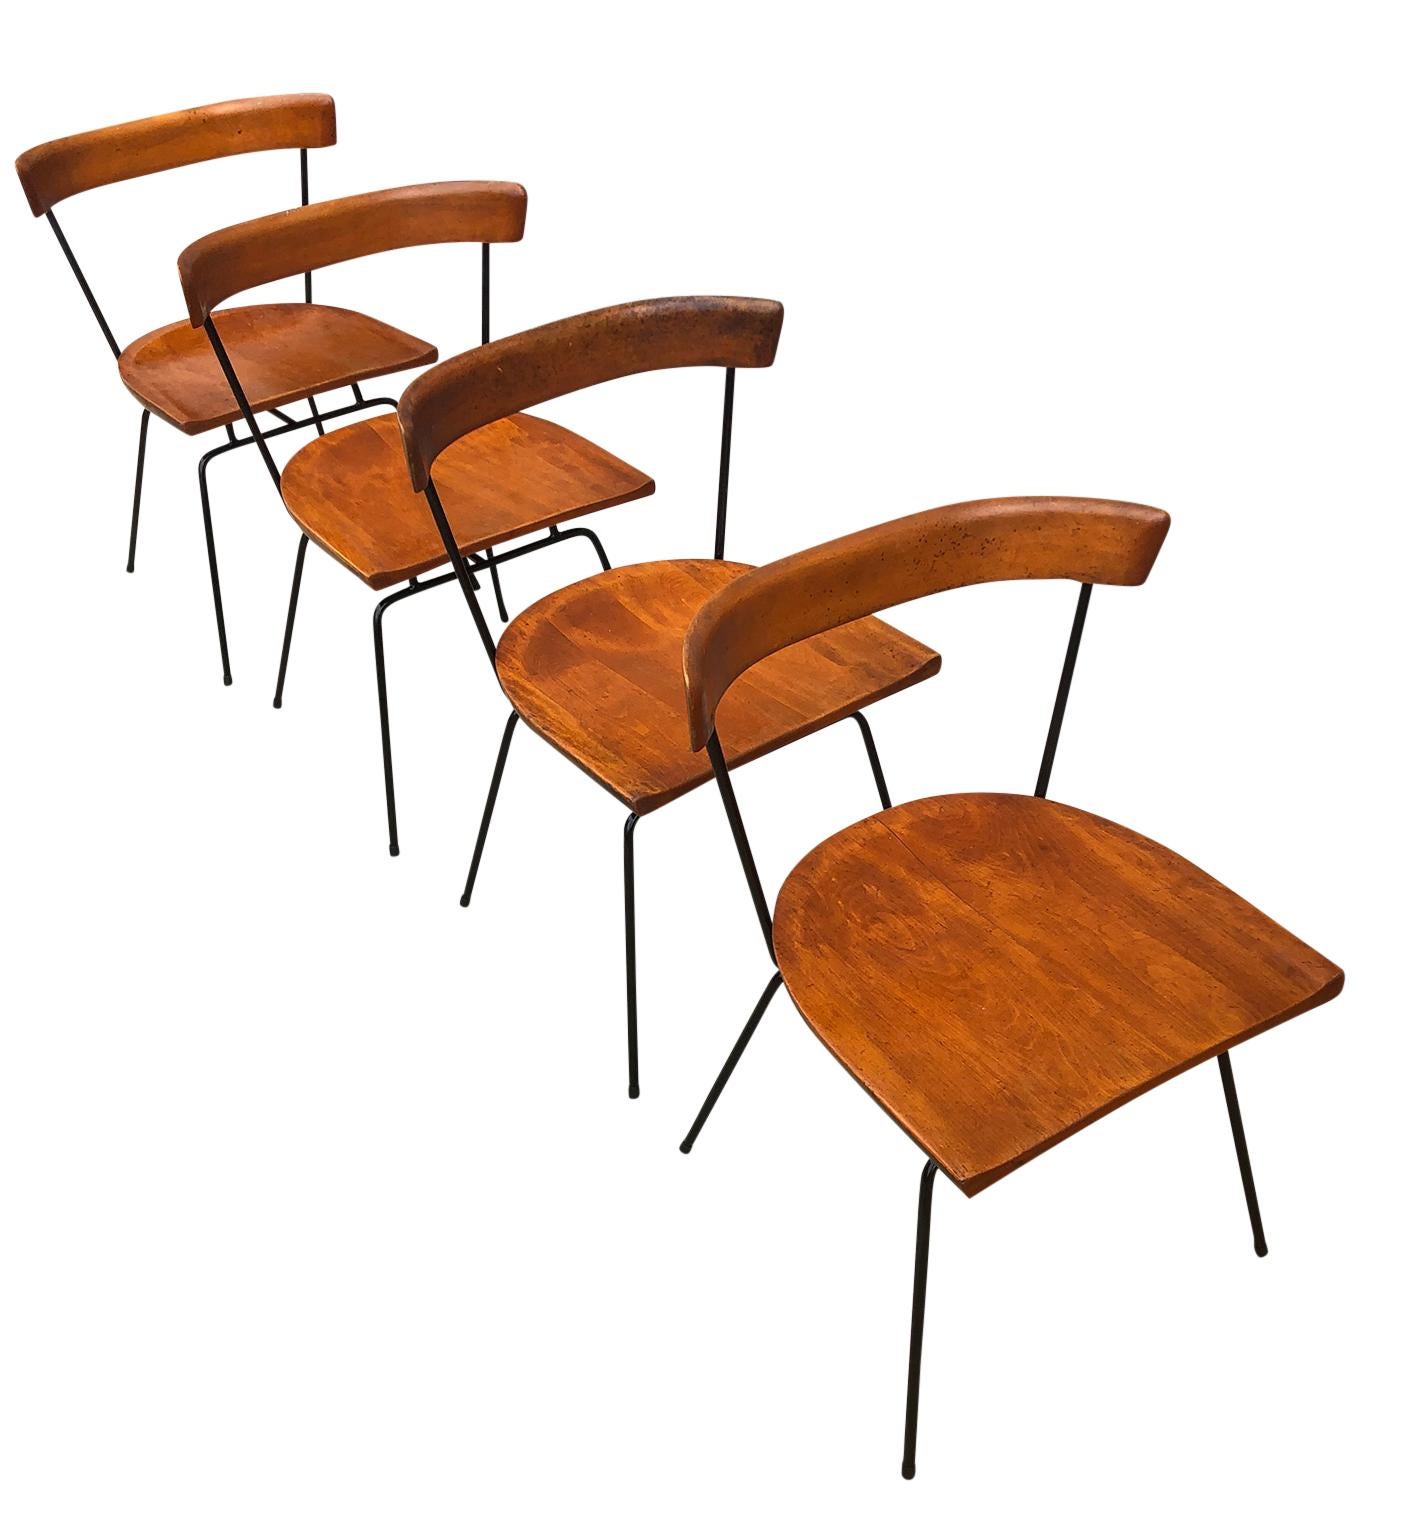 American Rare 4 Midcentury Paul McCobb Planner Group Dining Chairs #1535 Maple Iron